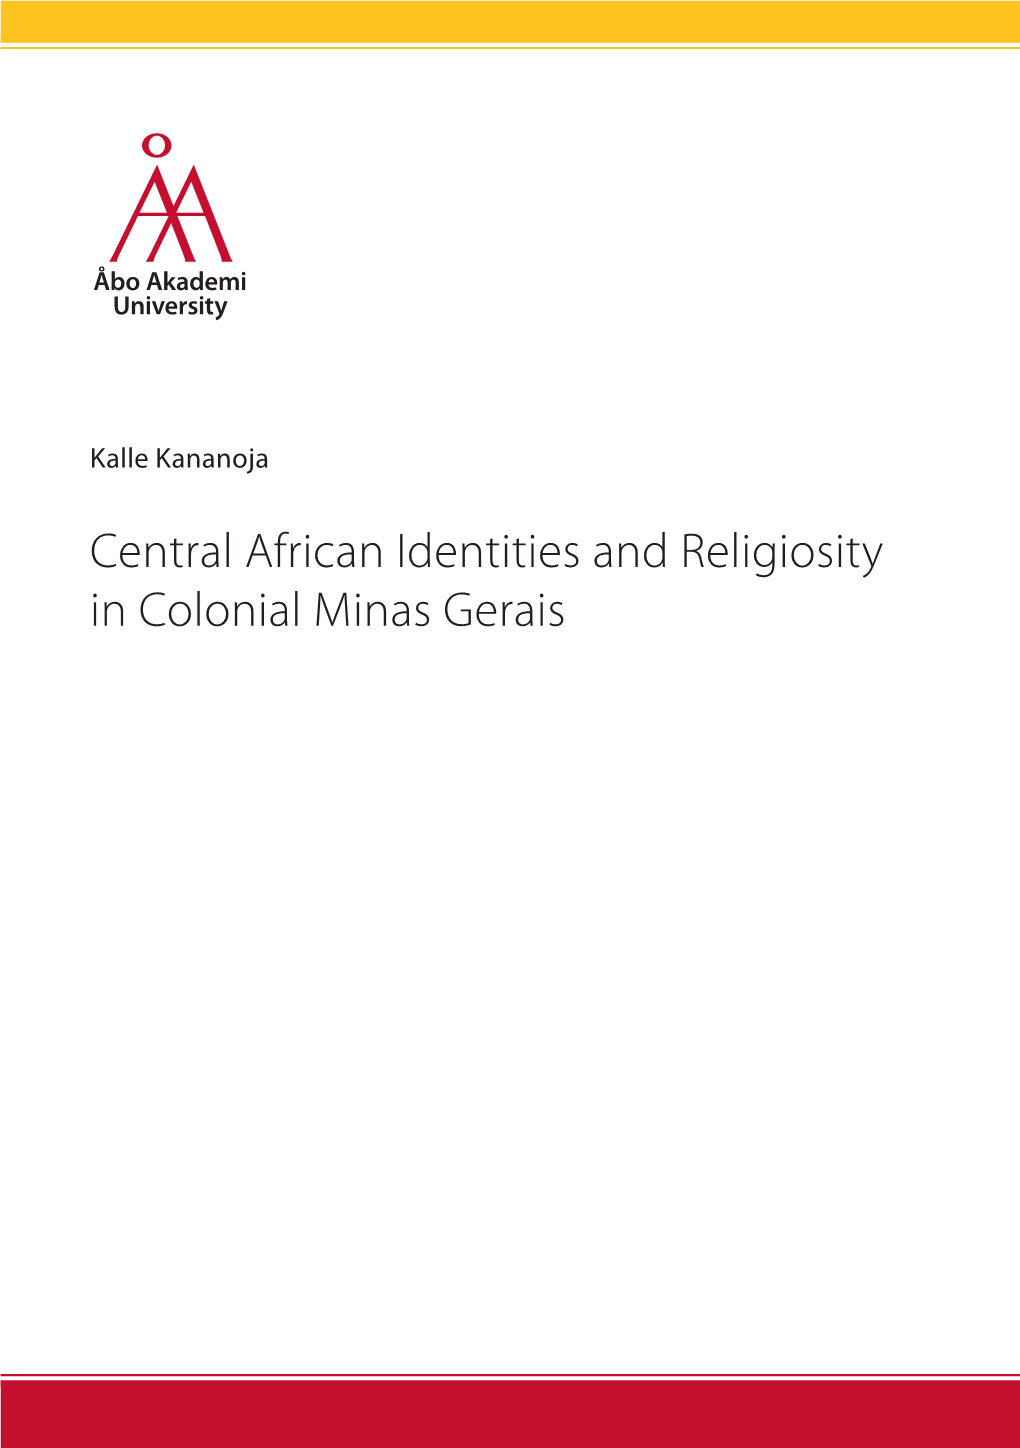 Central African Identities and Religiosity in Colonial Minas Gerais 2012